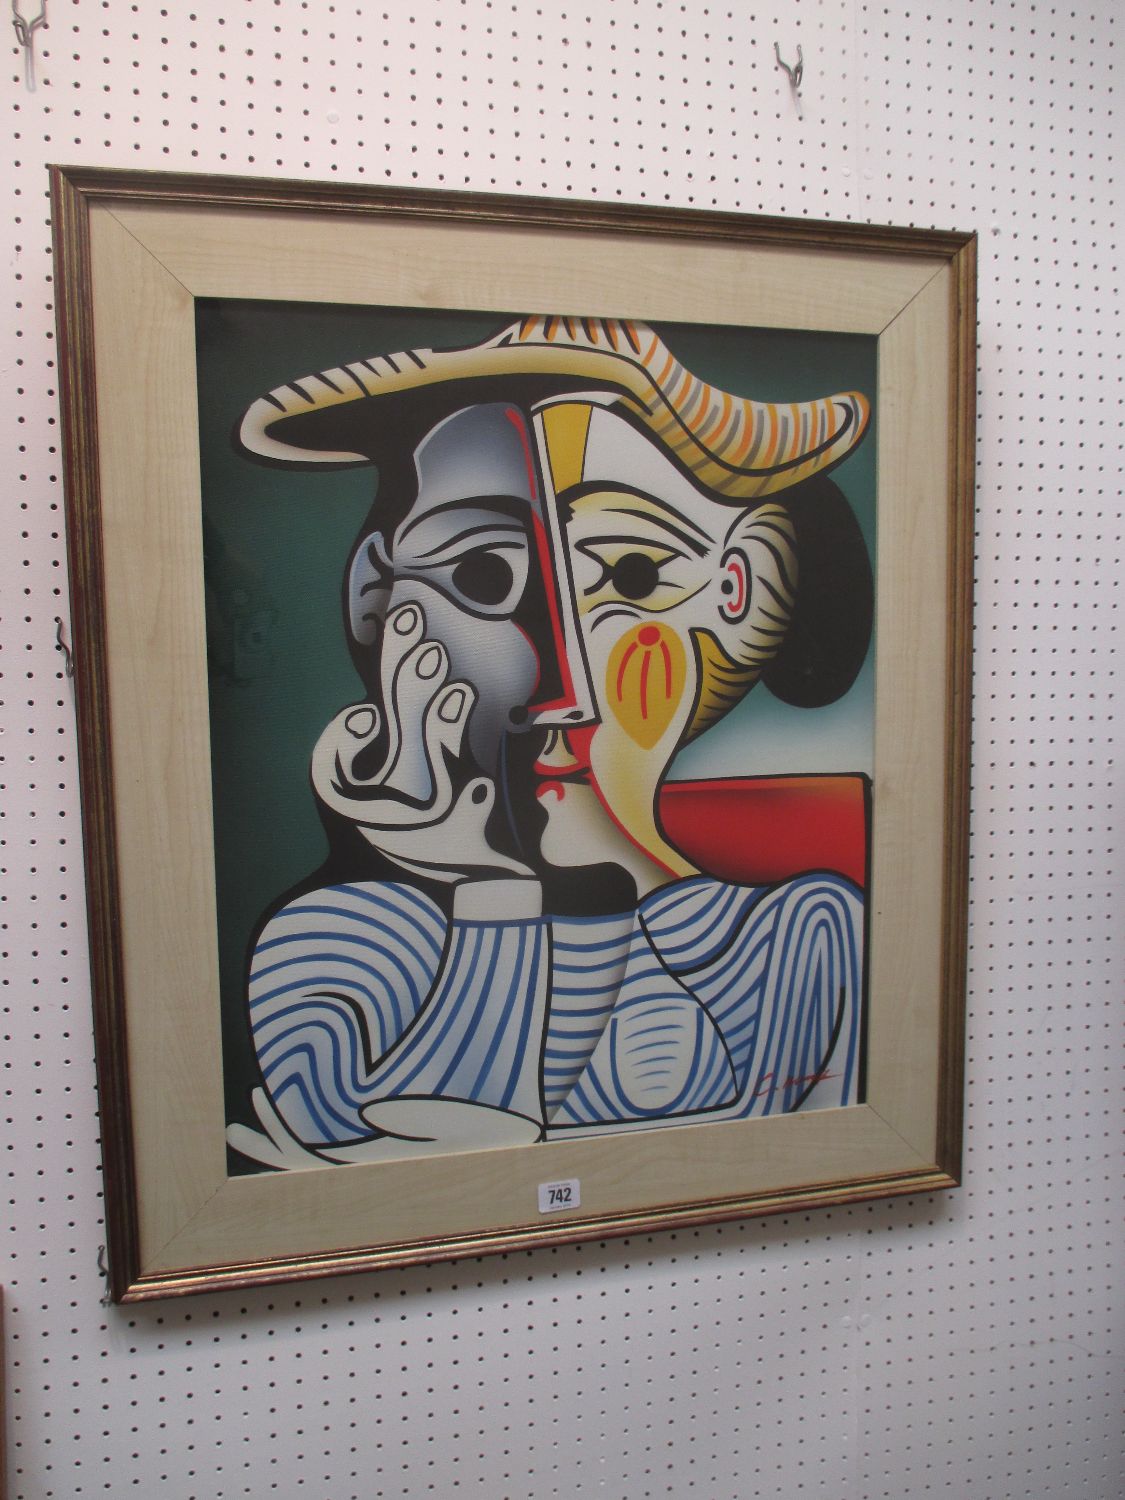 Homage to Pabblo Picasso, studio frame image portrait of a female in abstract, 59cmx49cm, bears a